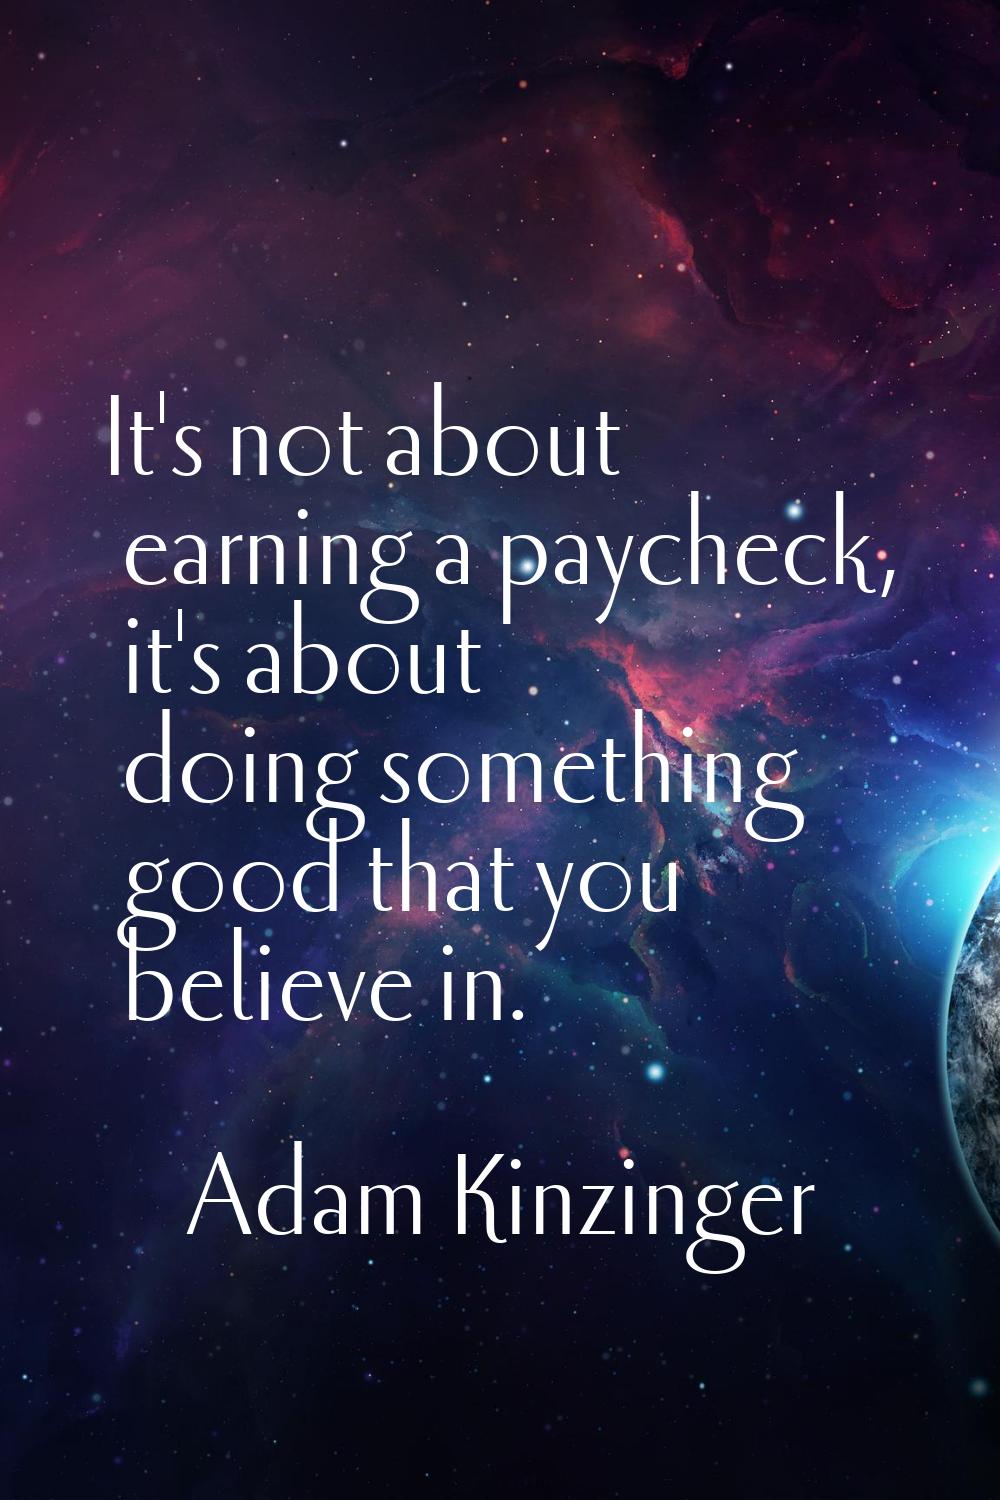 It's not about earning a paycheck, it's about doing something good that you believe in.